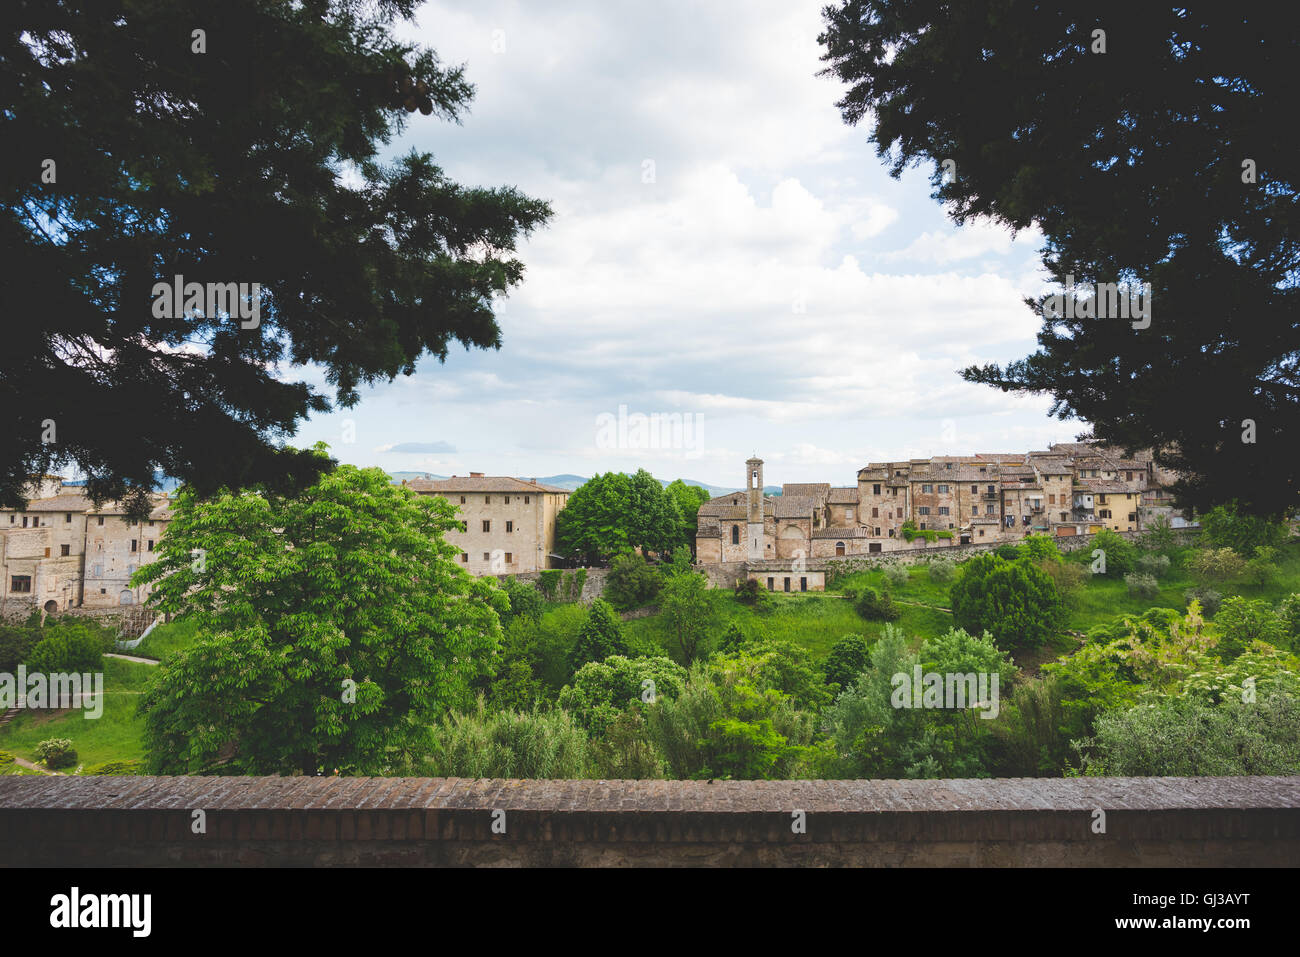 View of Colle di Val d'Elsa, Siena, Italy Stock Photo